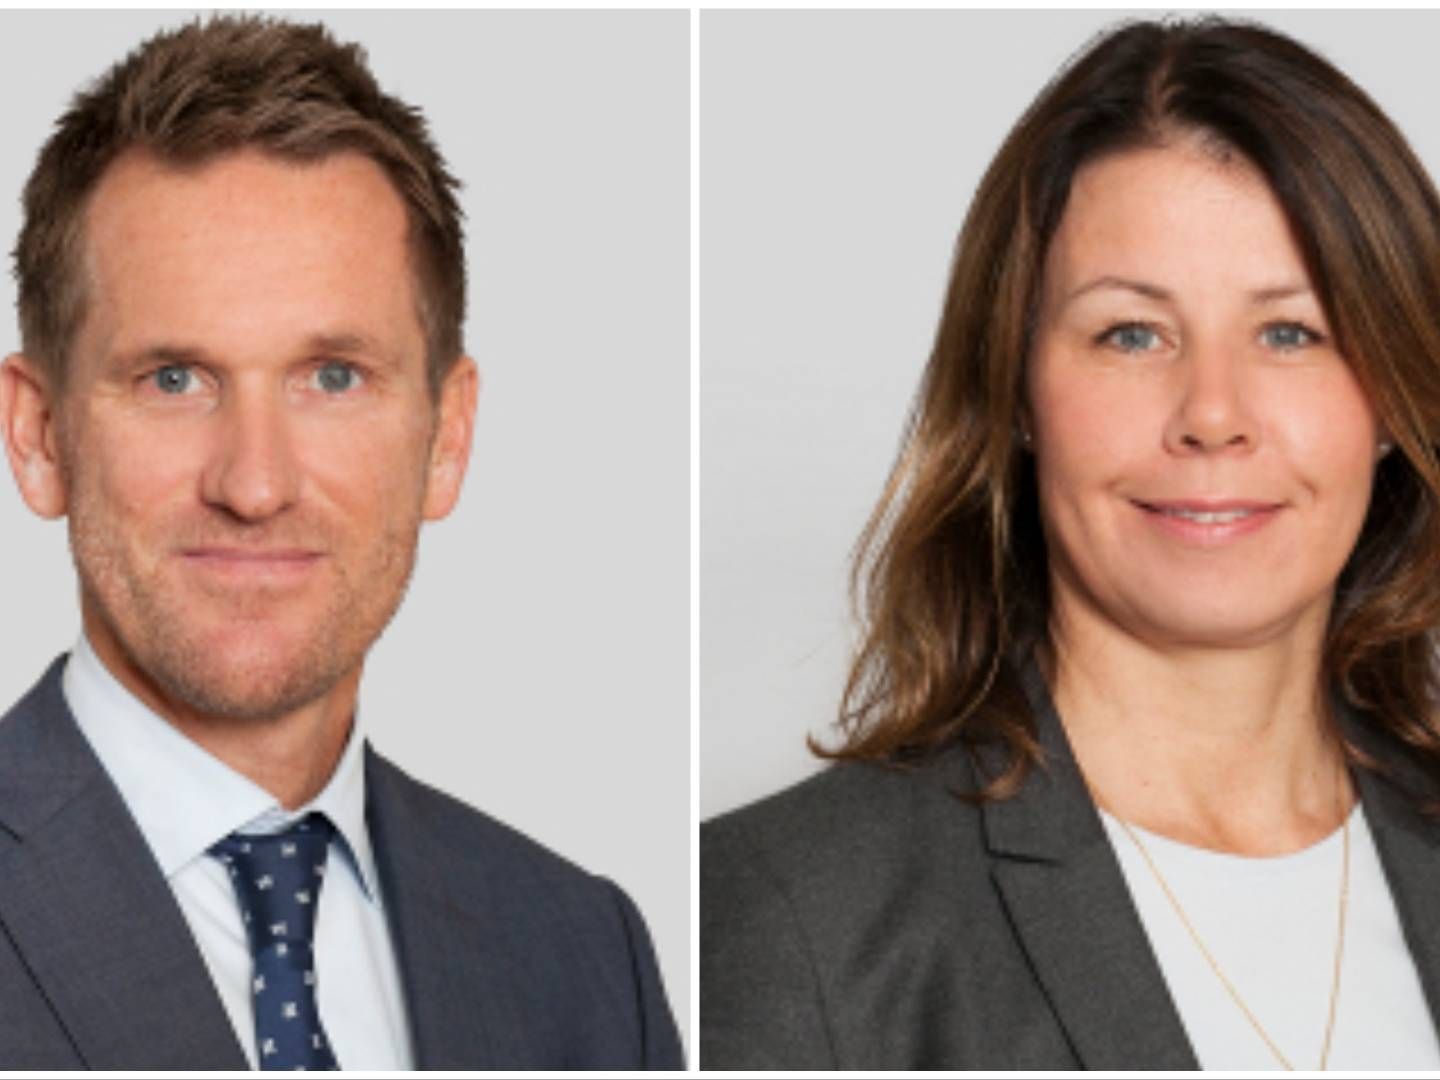 Henrik Emil Høyerholt and Maria Granlund are portfolio managers at Alfred Berg's Nordic high yield fund. | Photo: PR / Alfred Berg